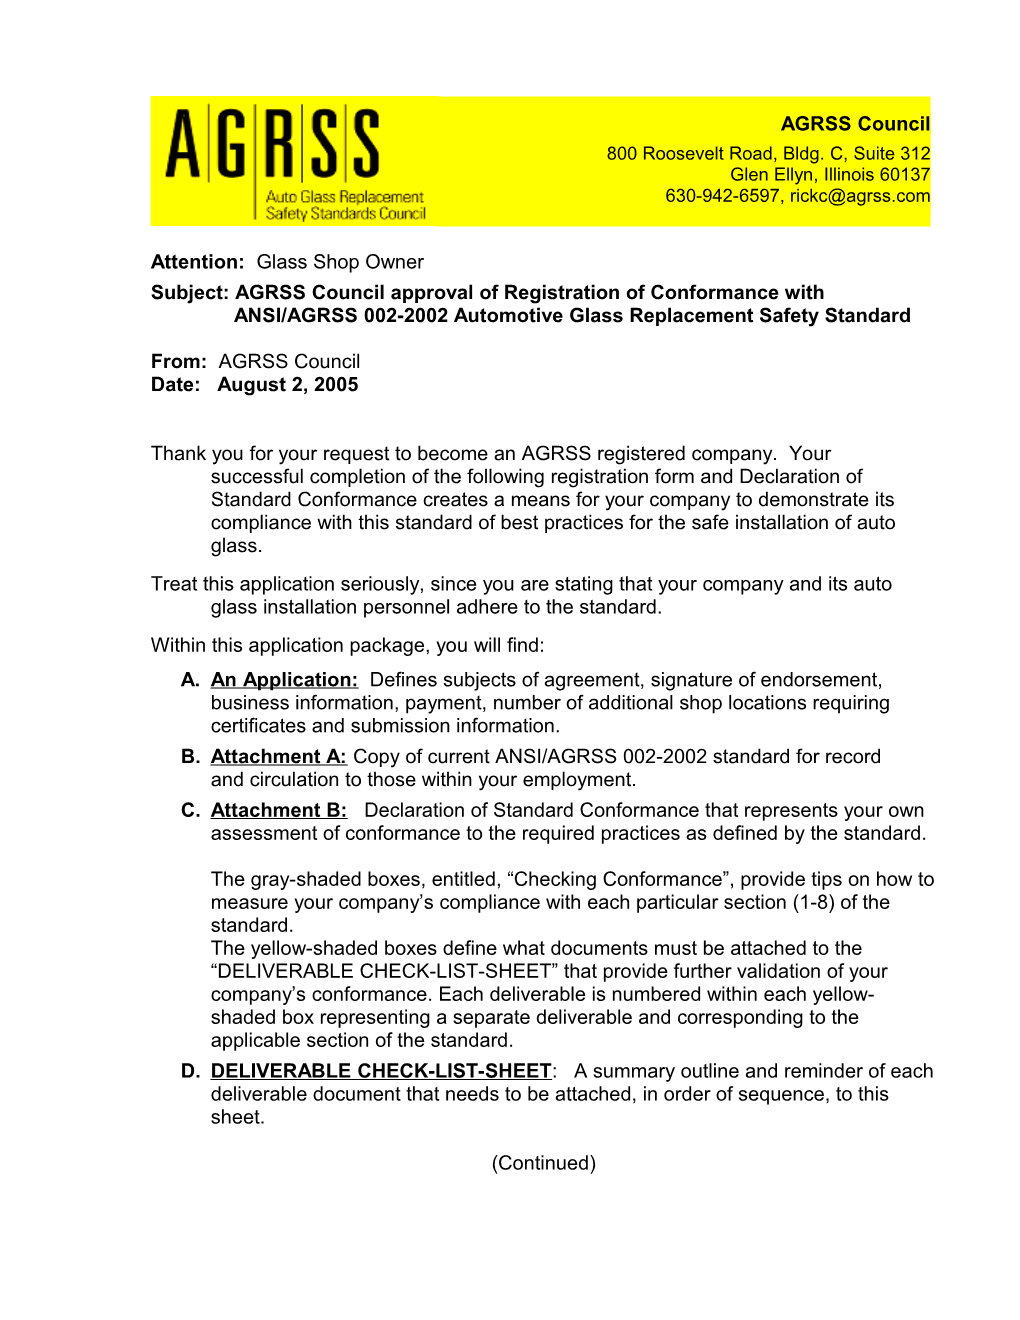 Subject: AGRSS Council Approval of Registration of Conformance With